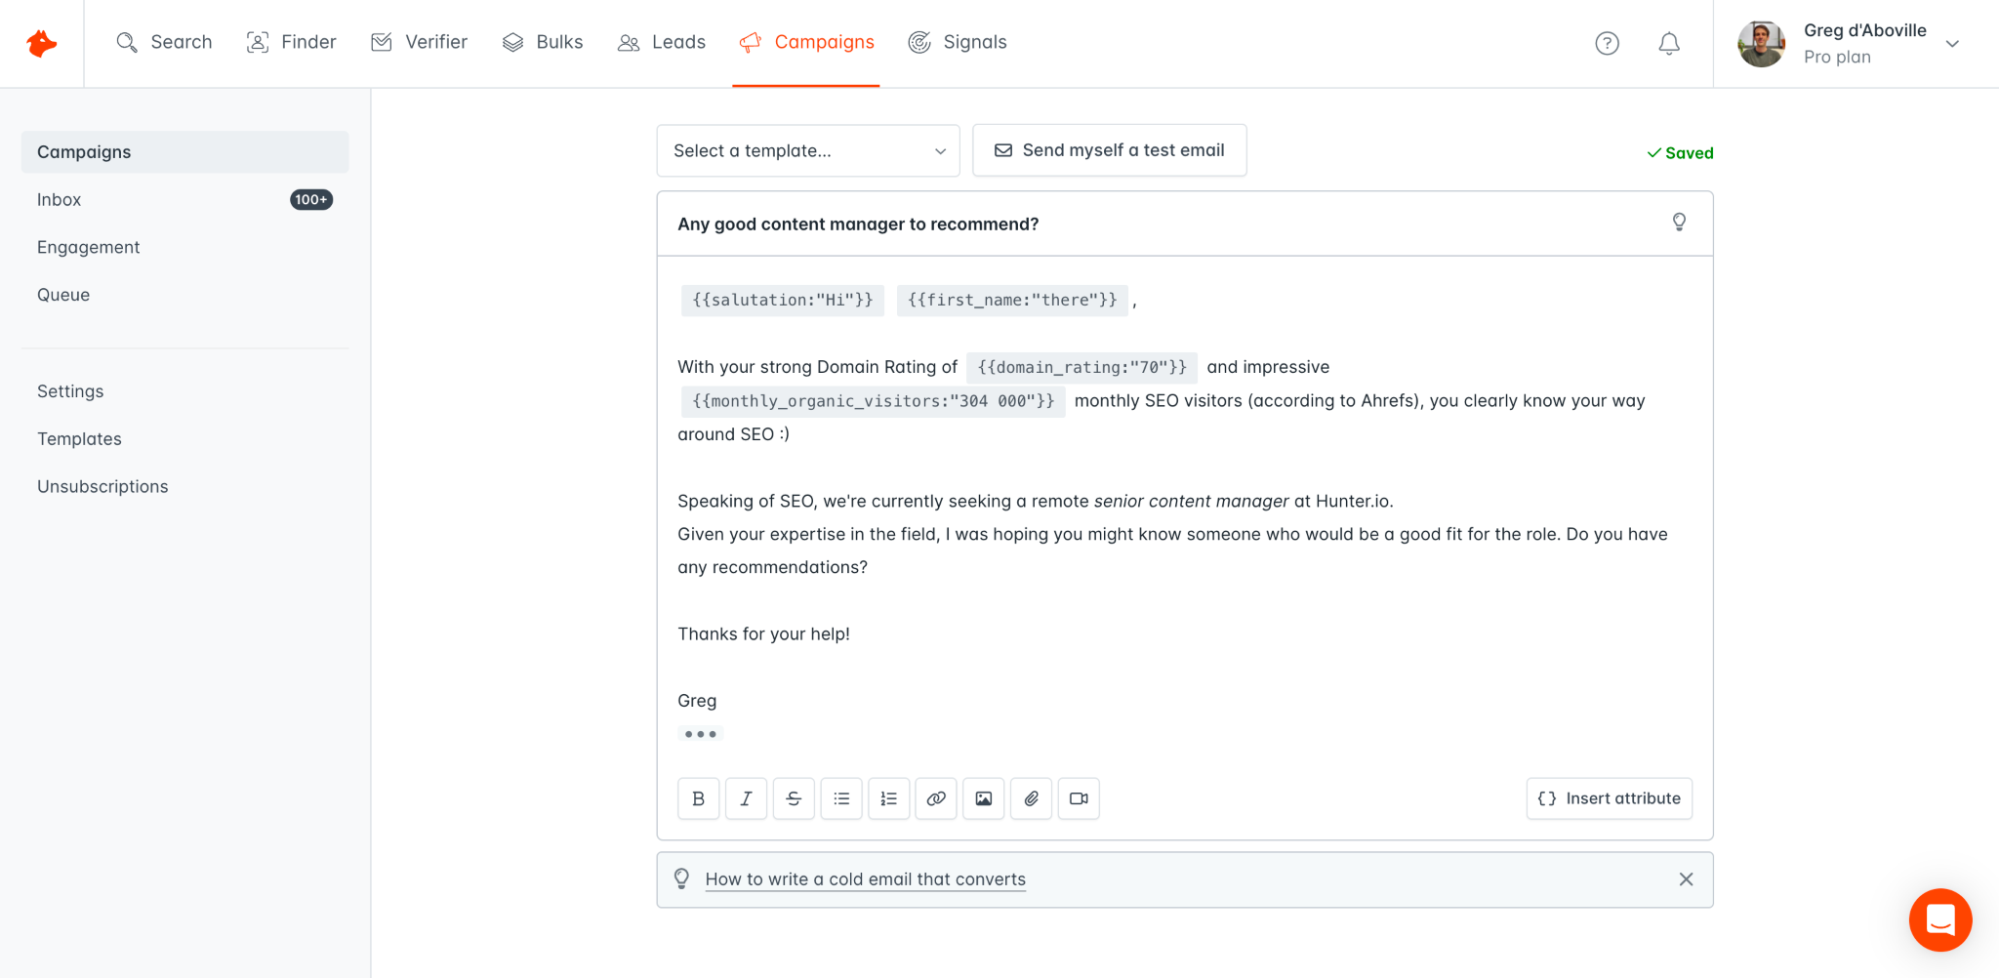 Screenshot of a cold email featuring user attributes